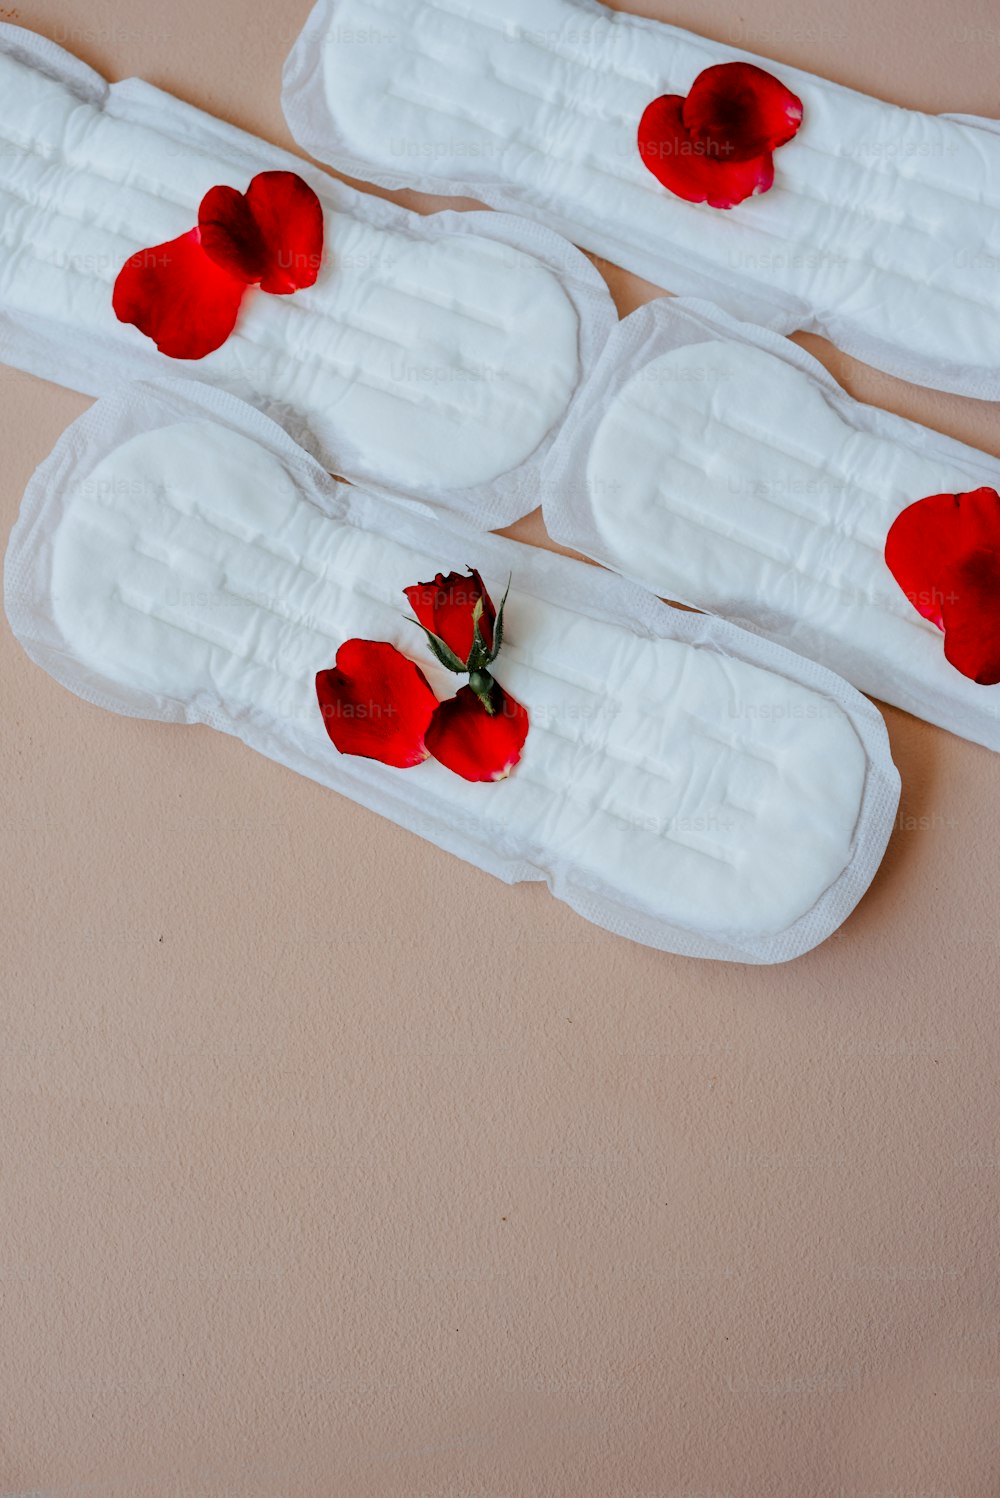 Period Pad Pictures  Download Free Images on Unsplash